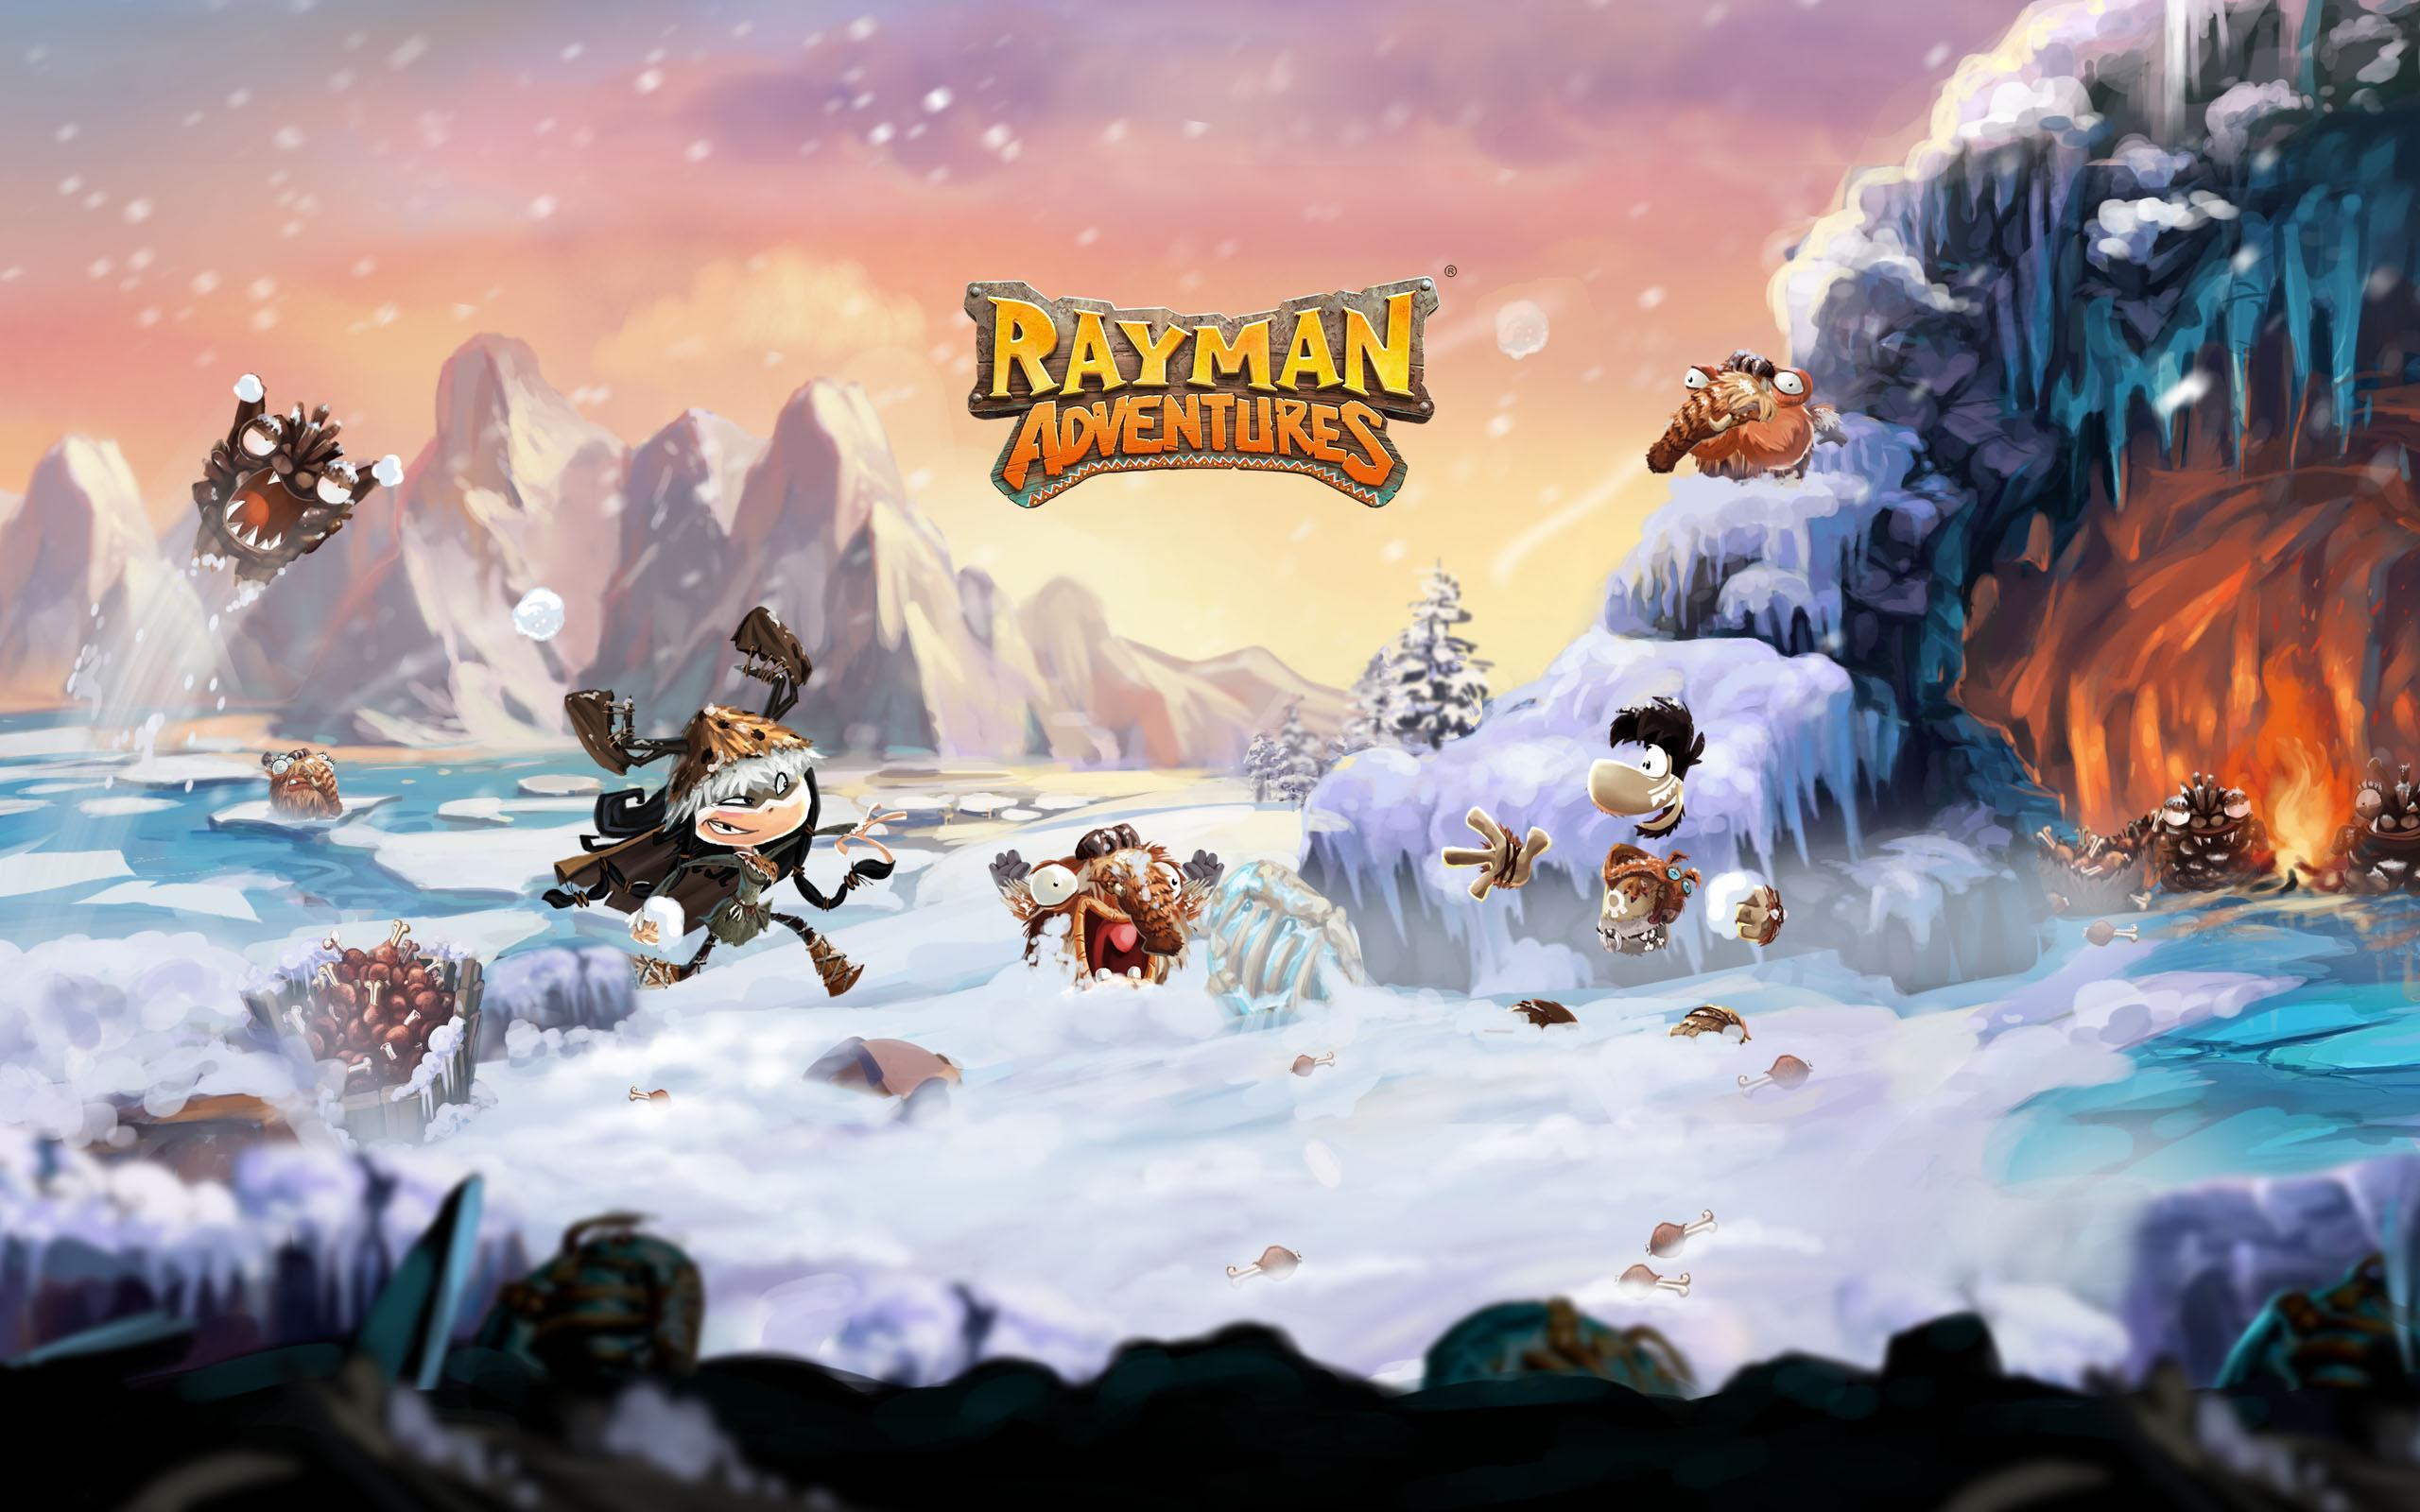 Rayman® Legends Beatbox for Android - Free App Download